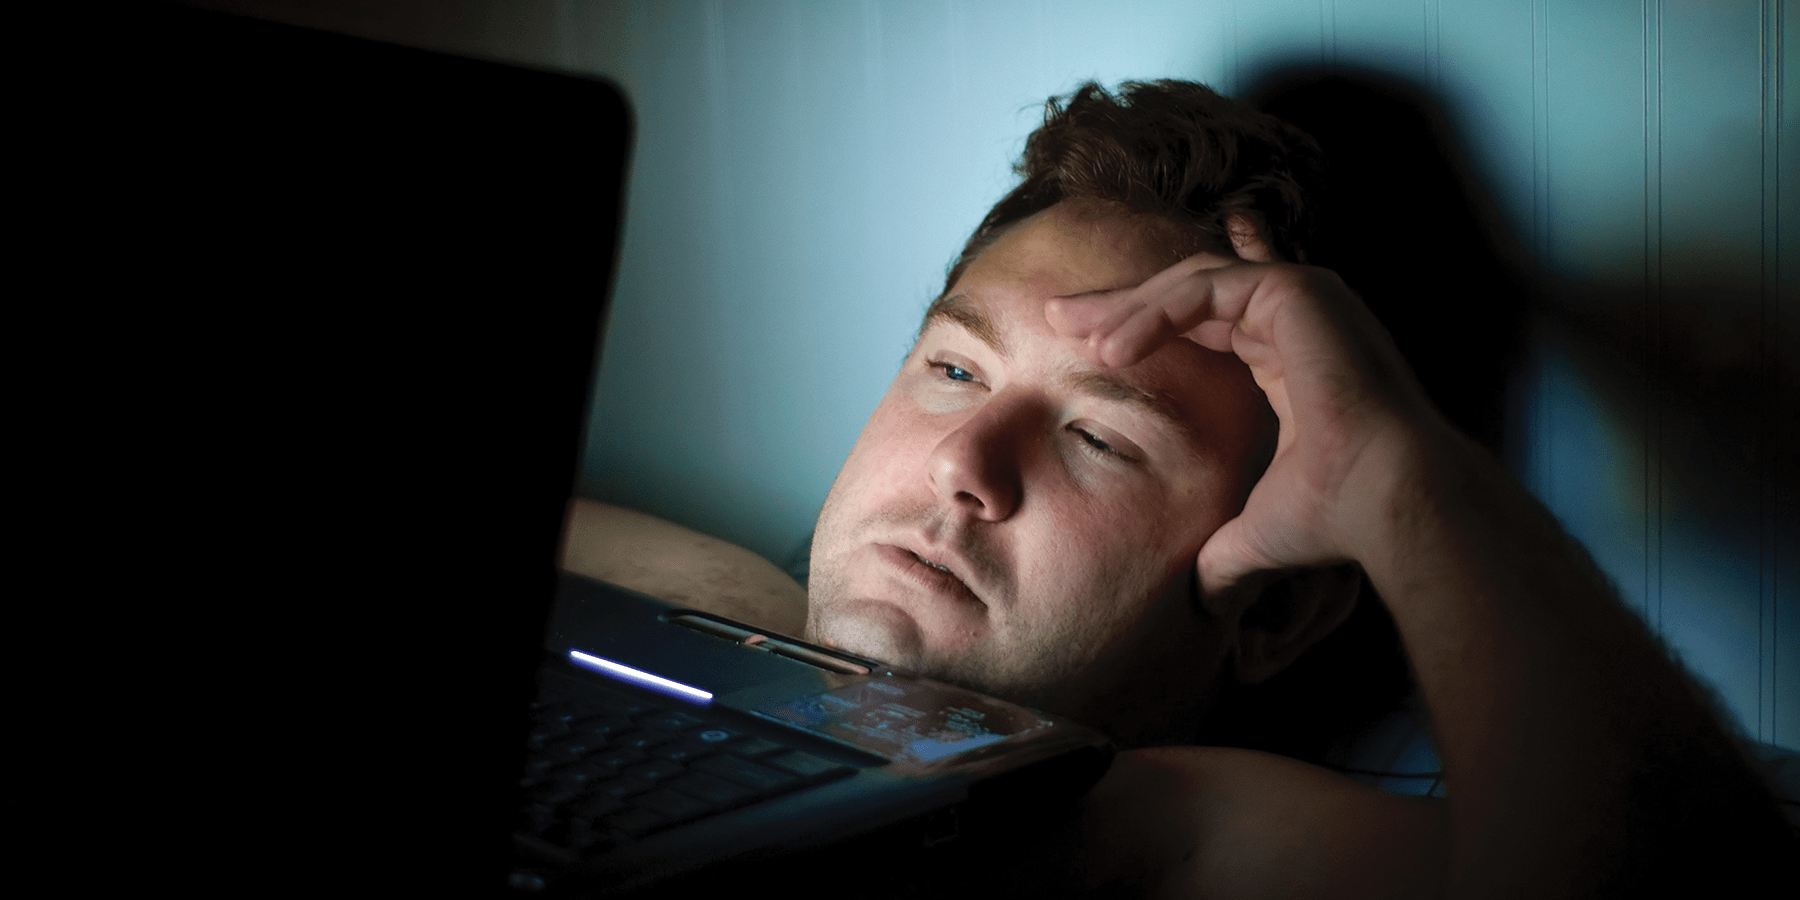 Man staying up late at night while using laptop to research if lack of sleep causes weight gain